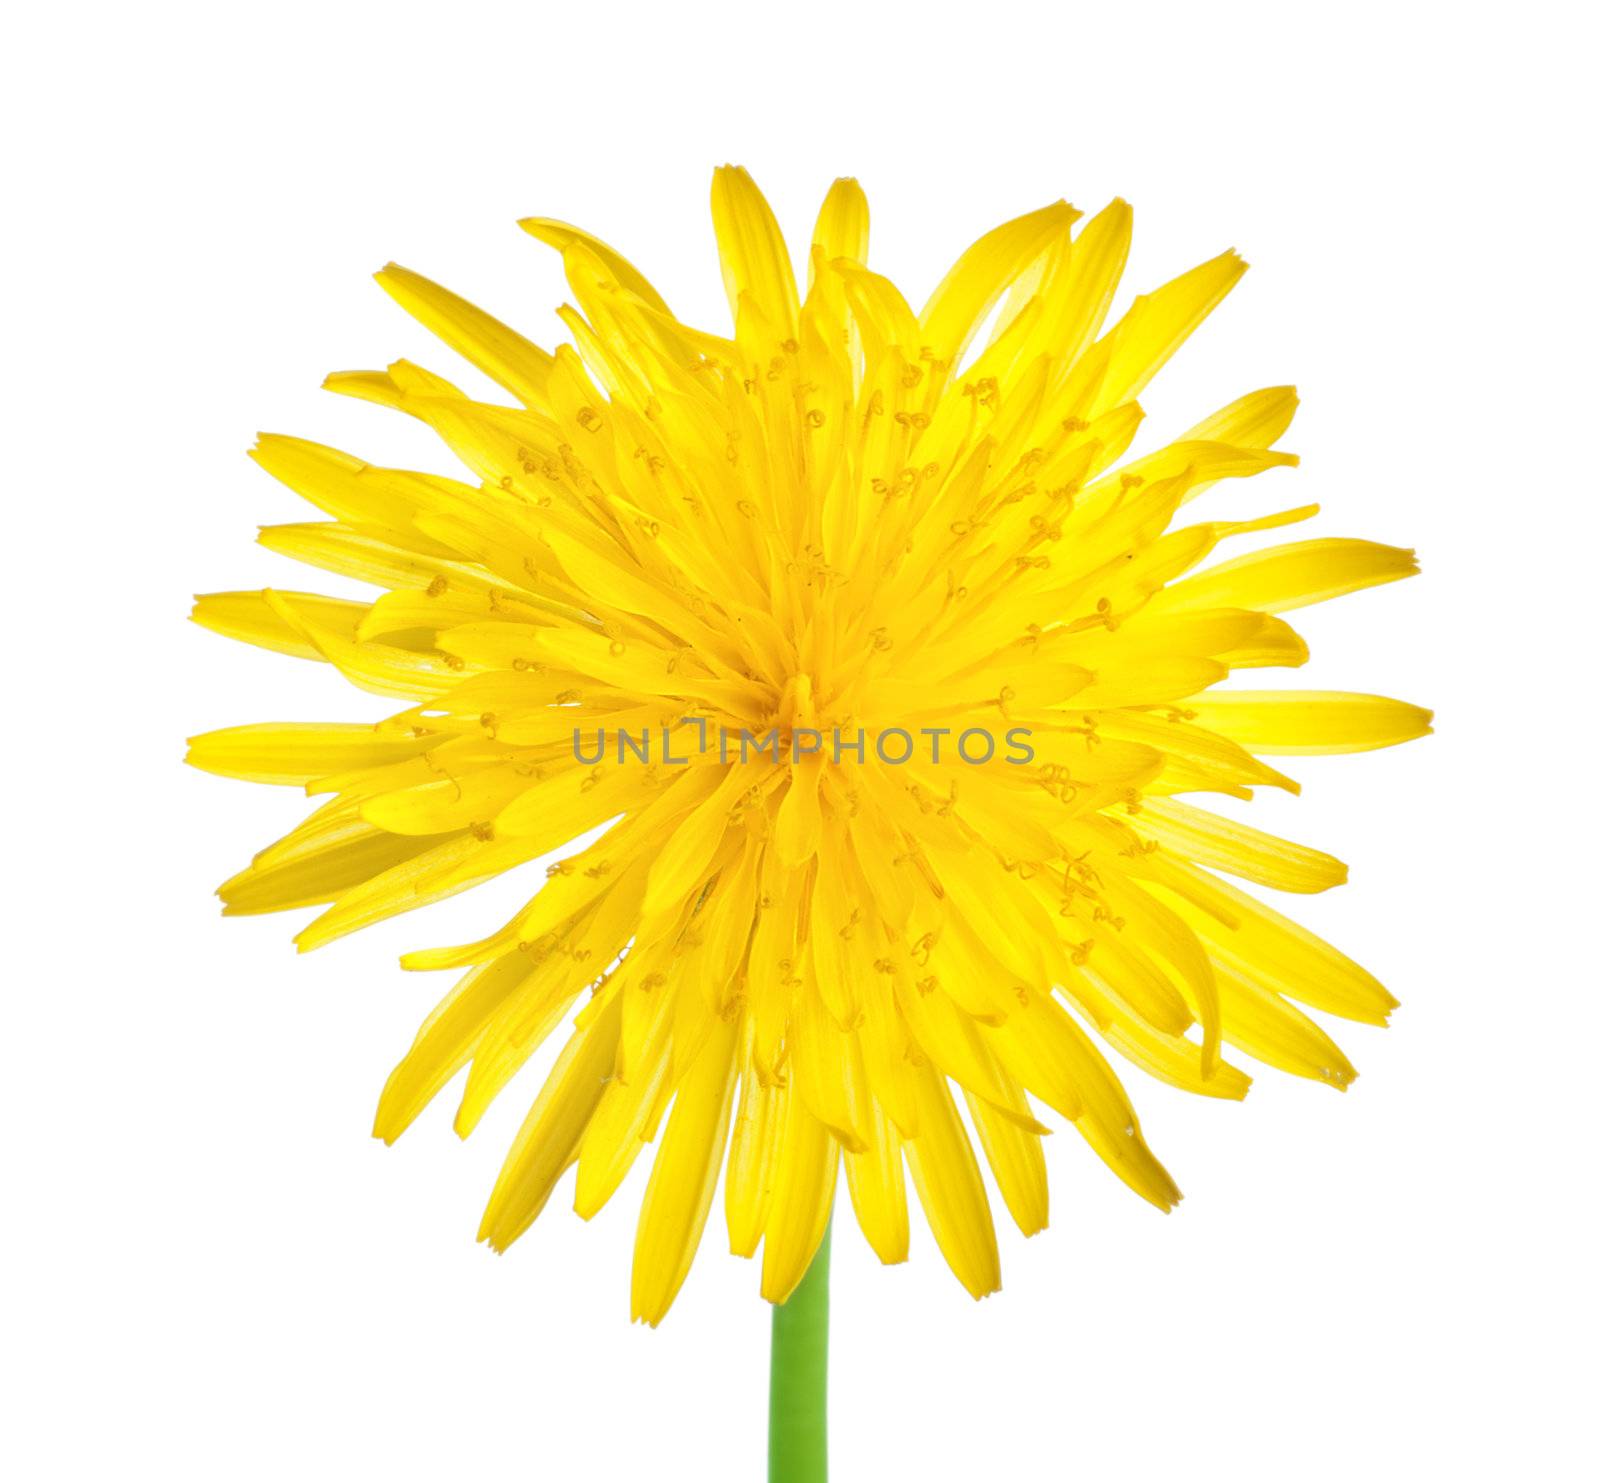 Dandelion close up by Givaga